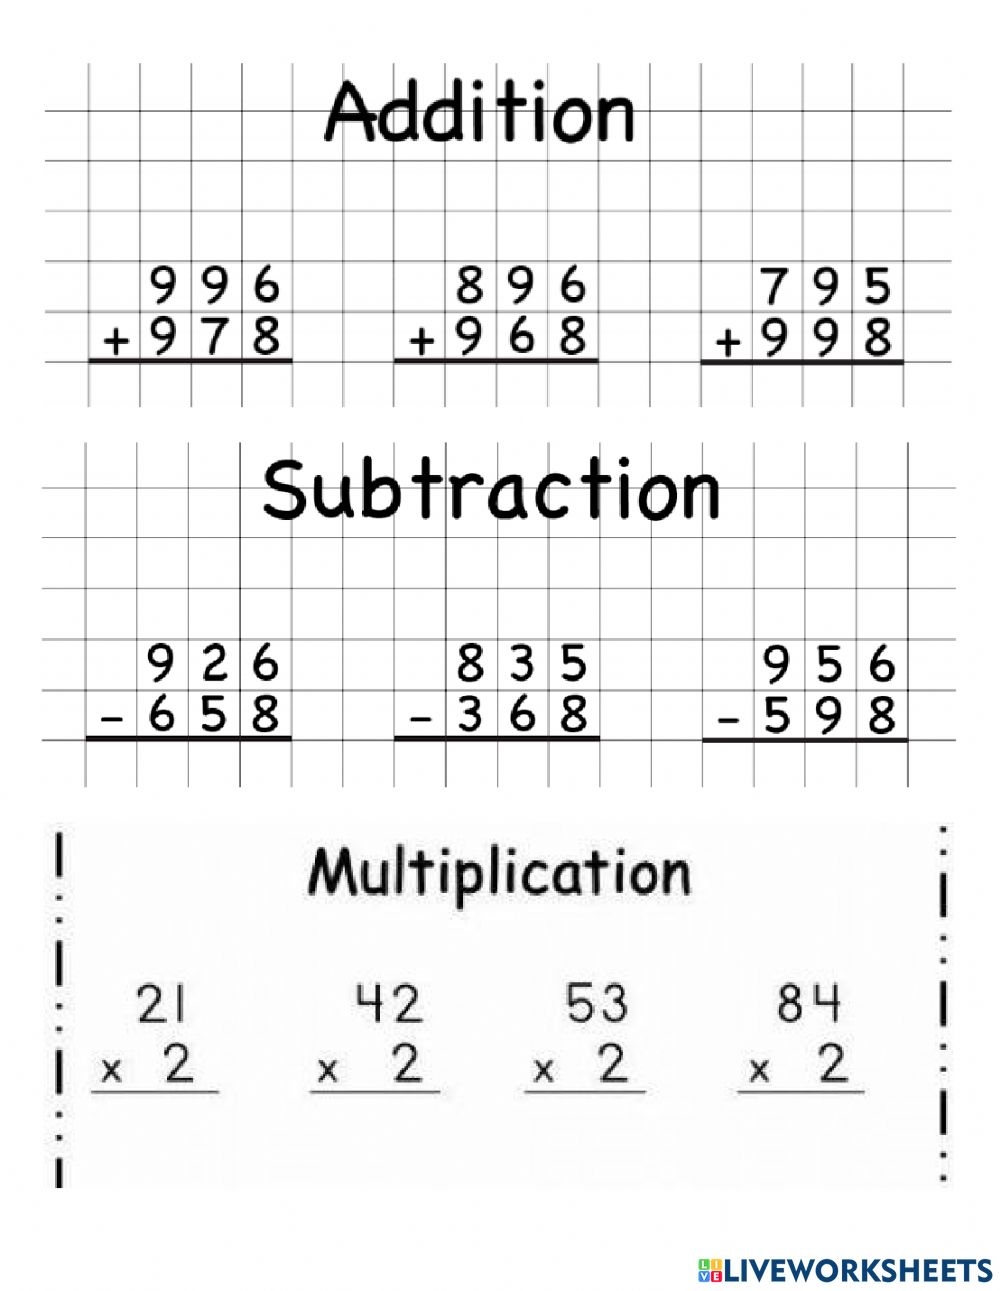 Addition Subtraction And Multiplication Worksheet